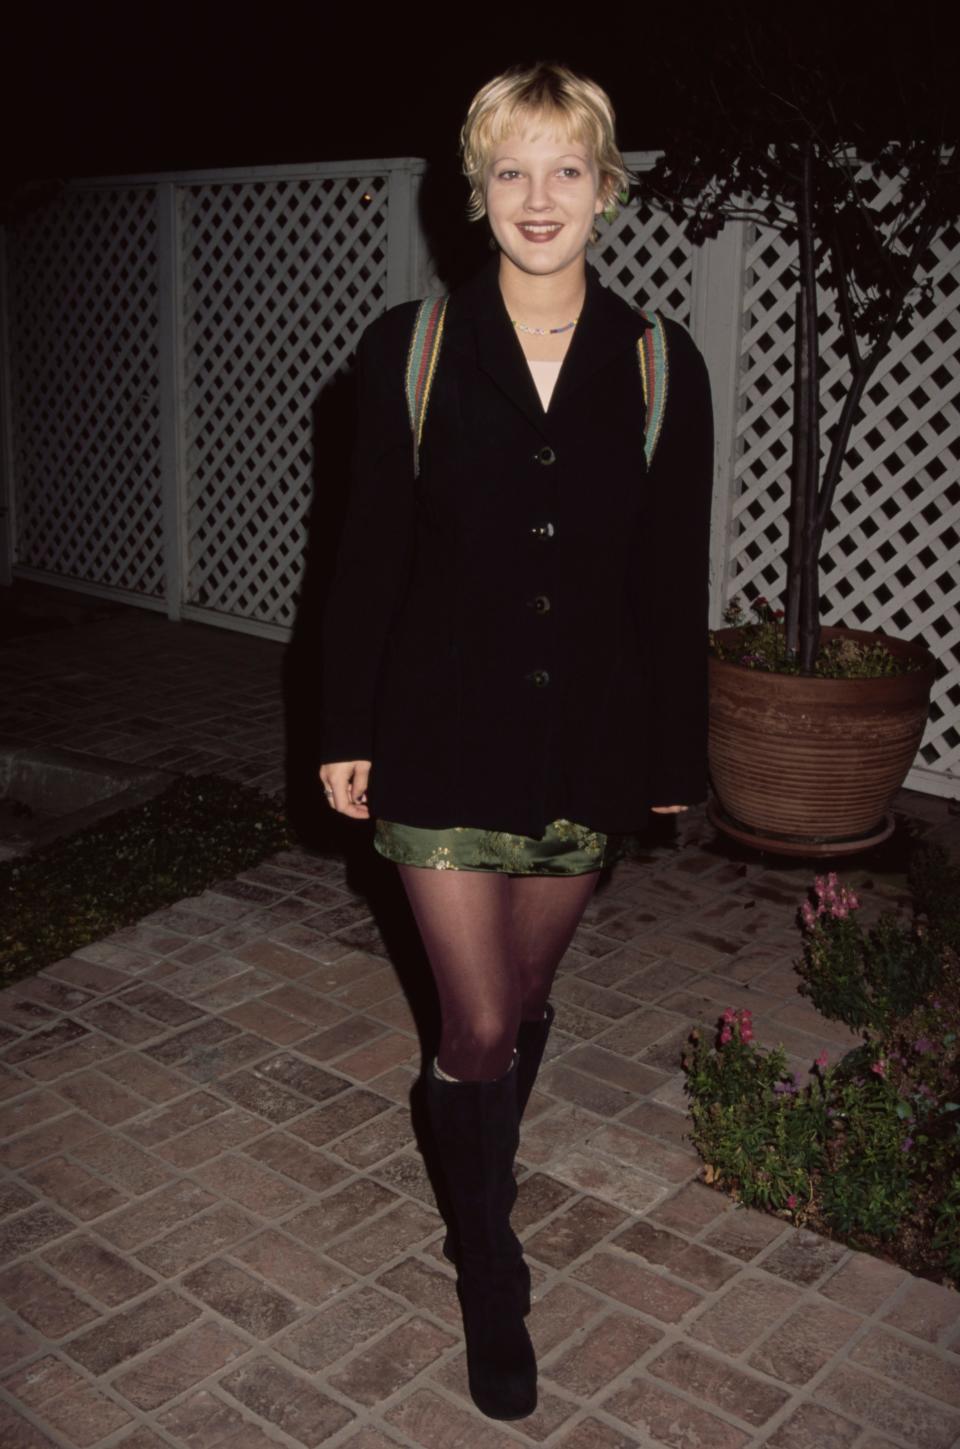 Drew Barrymore, wearing a black jacket over a green miniskirt, with what are possibly shoulder straps of a backpack over the jacket, and black knee-high boots, smiling as she attends an unspecified event, location unspecified, 1994